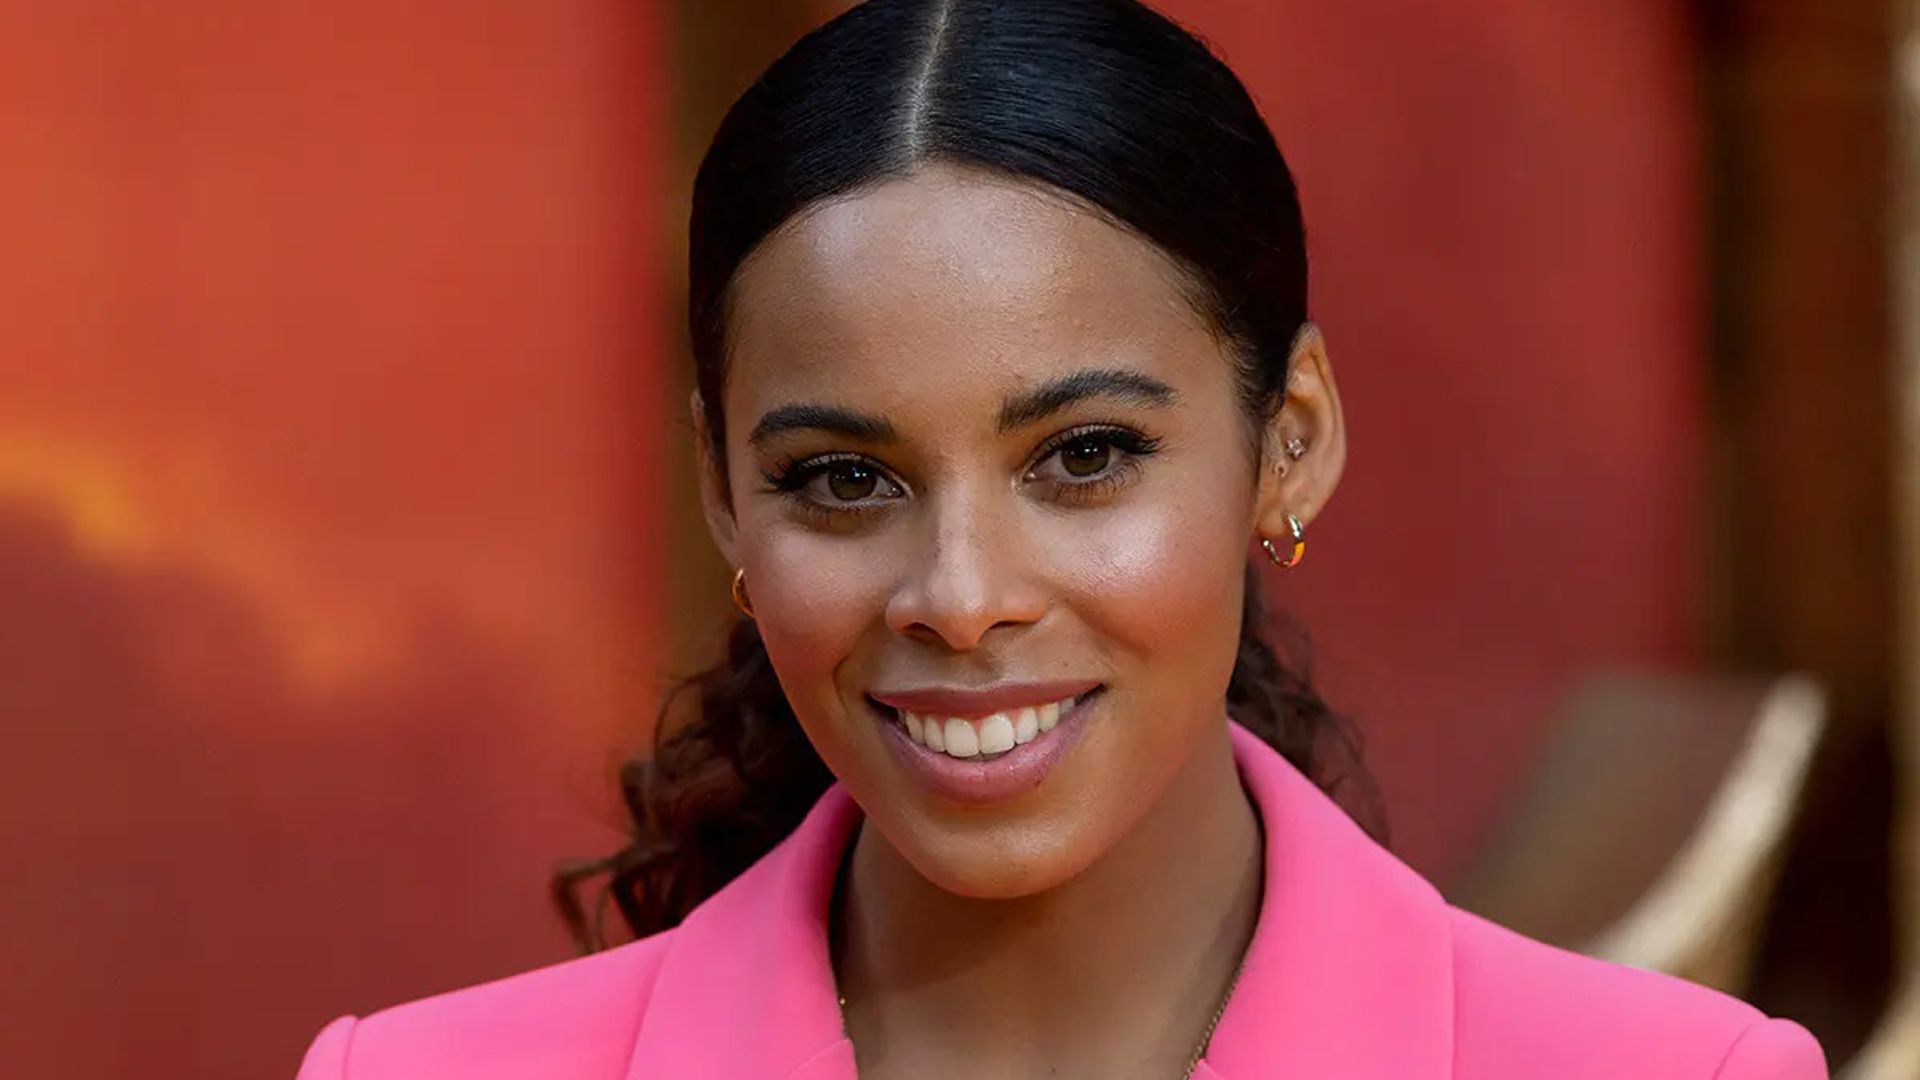 rochelle-humes-pink-top